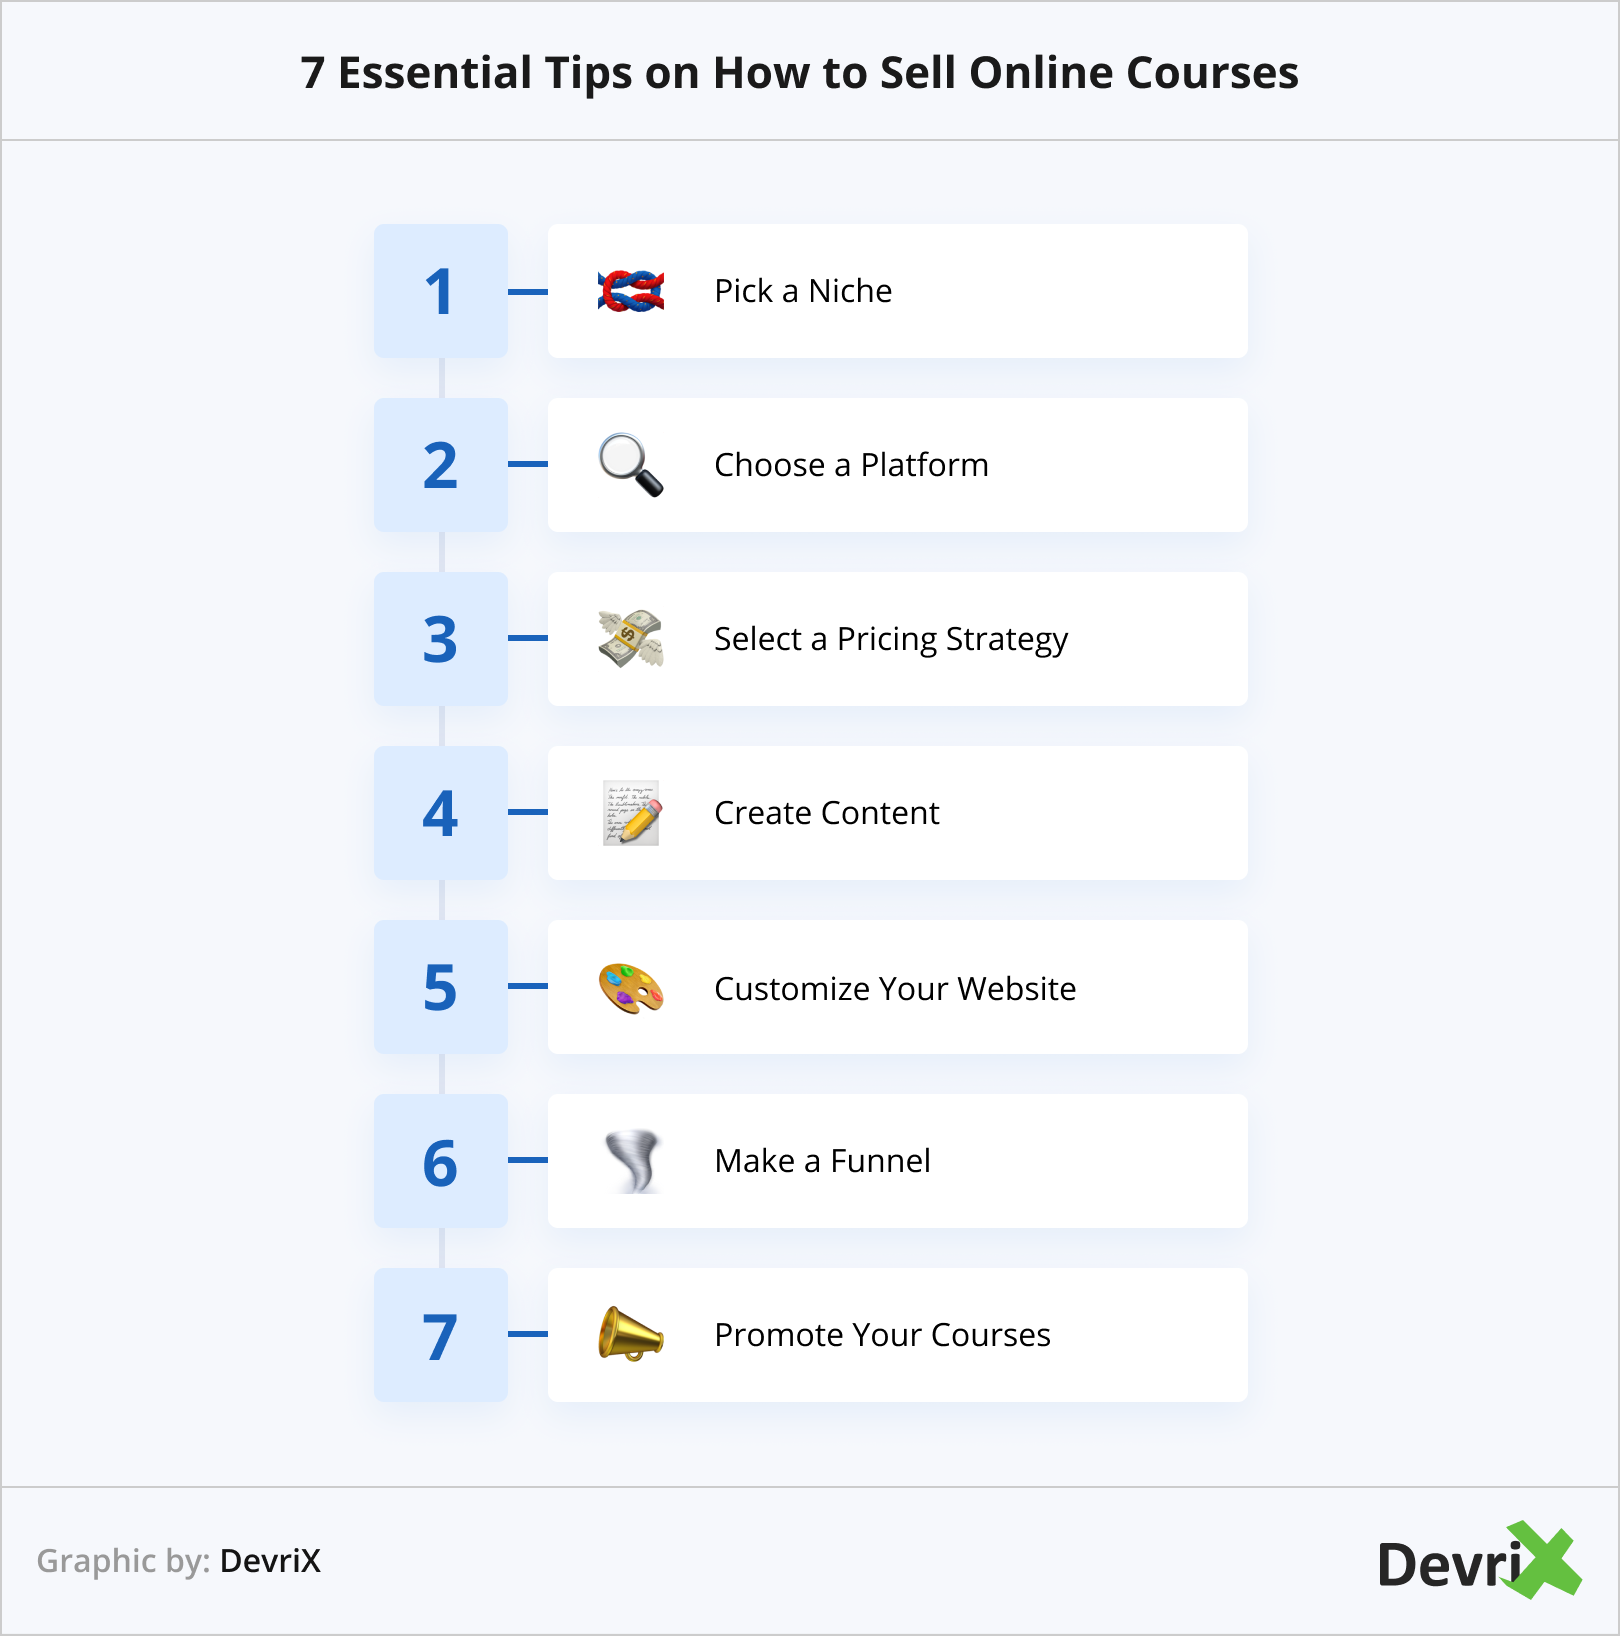 7 Essential Tips on How to Sell Online Courses